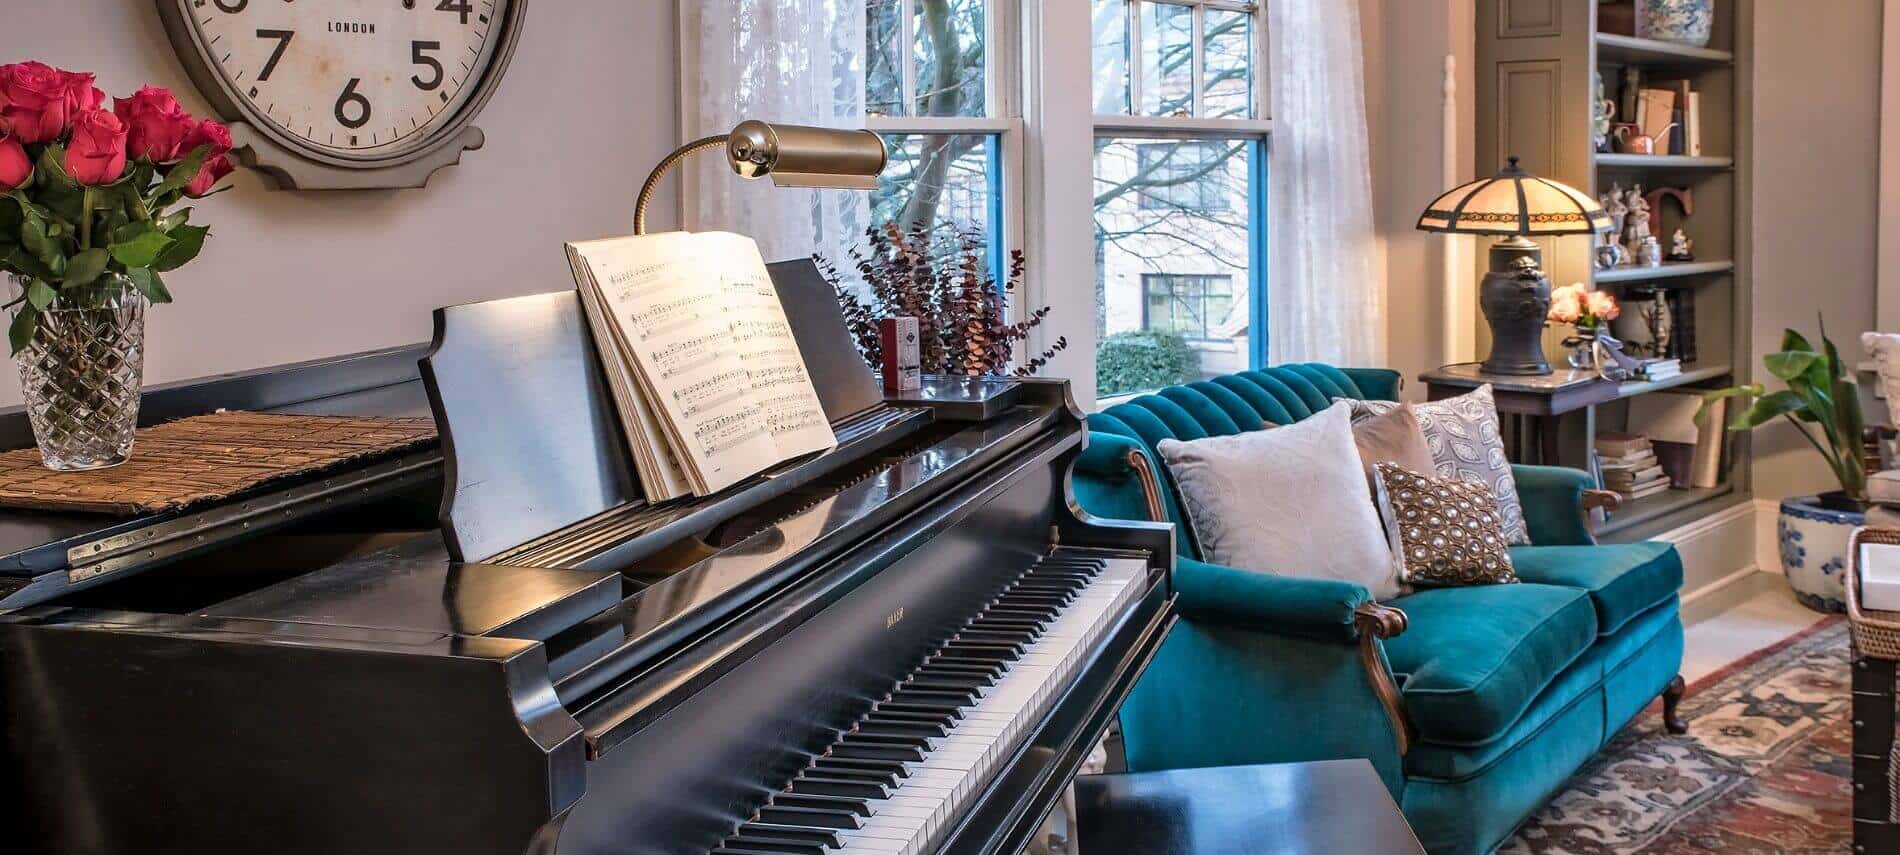 Sitting area with a teal colored sofa and a black piano. 